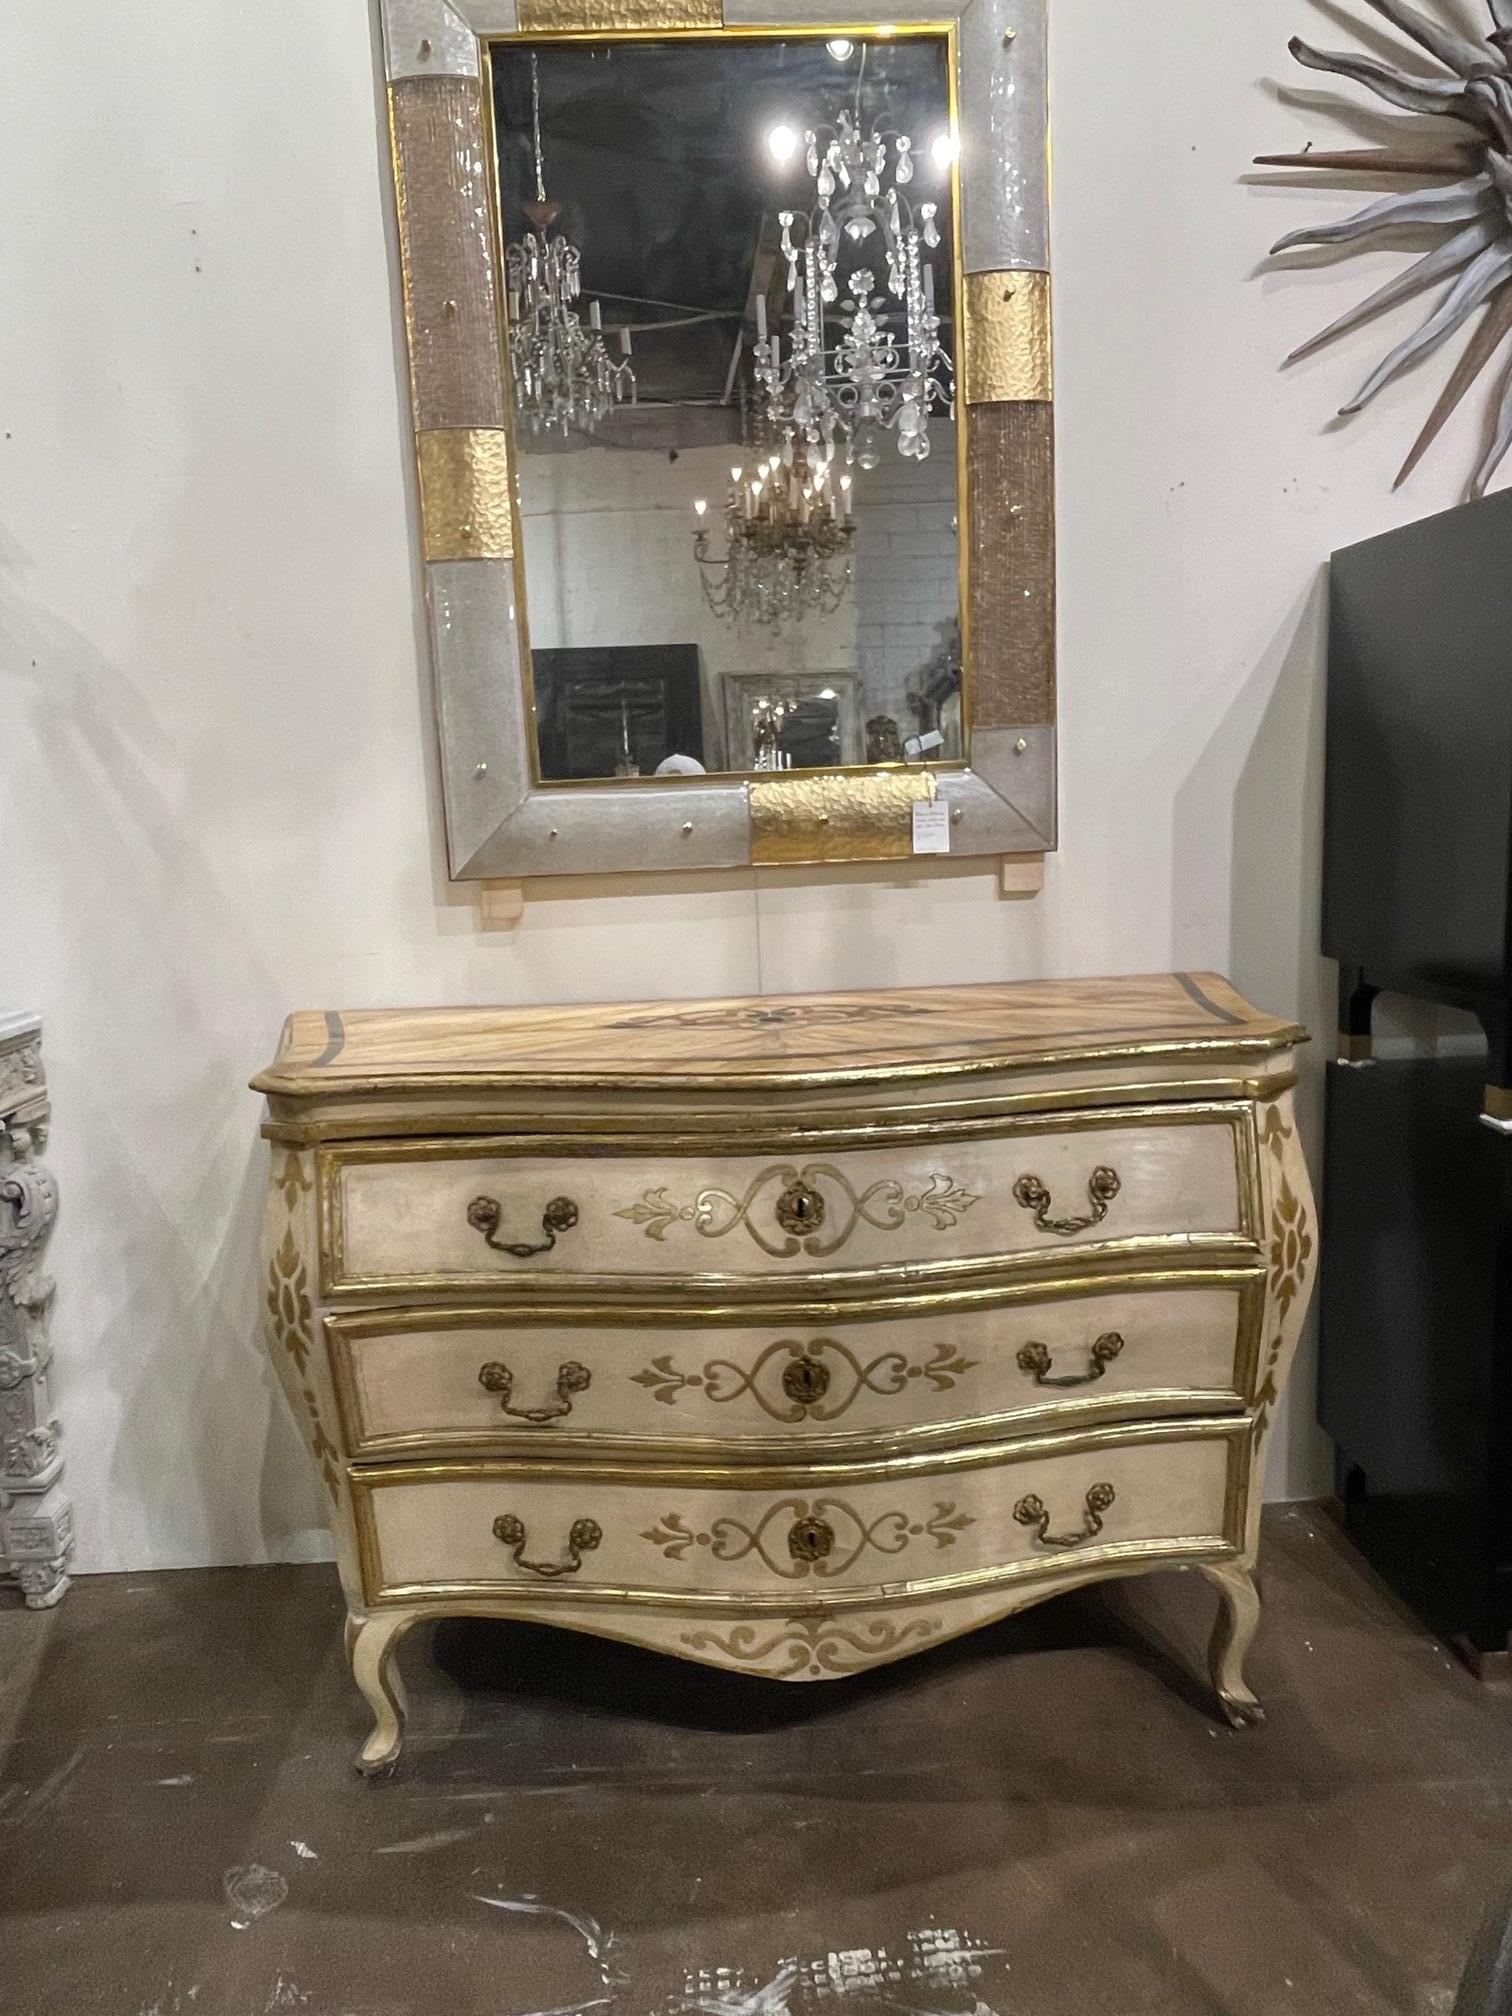 Fine 18th century Italian lacquered and gilded bombe shaped commode, Circa 1780. This commode has a beautiful patina. Sure to make a statement in any home.